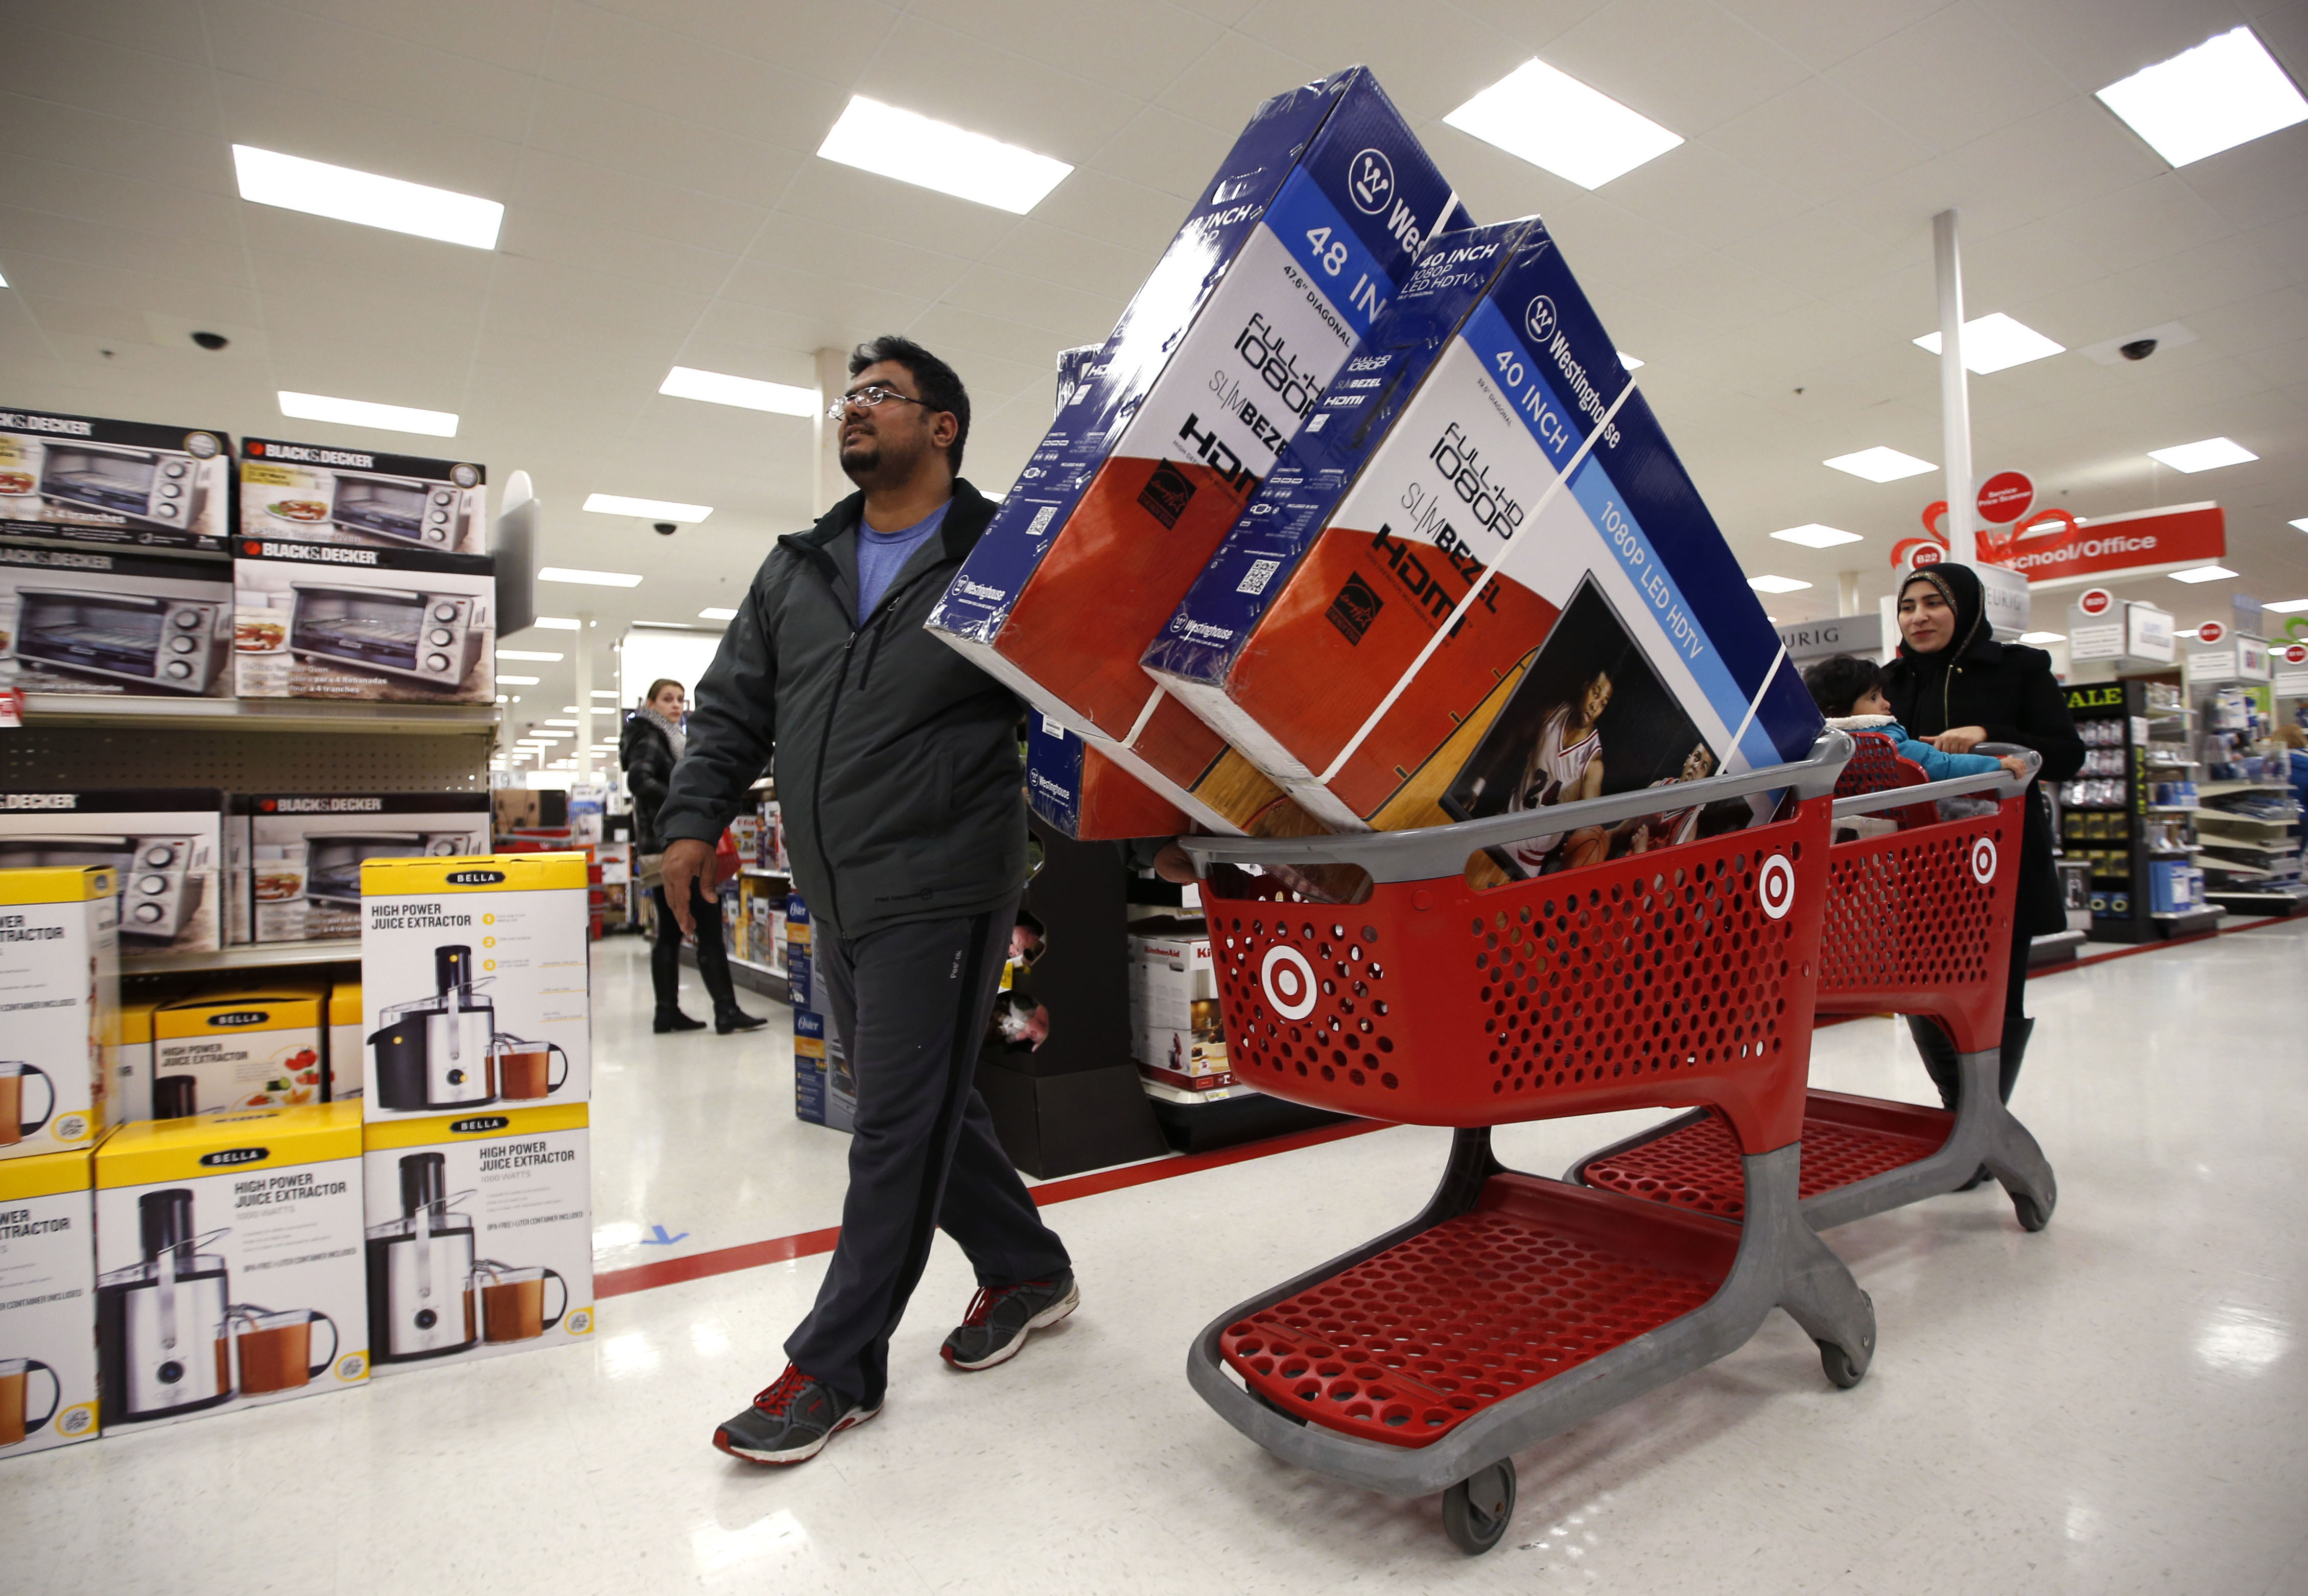 Black Friday Originally Had Dark Meaning – All About America - What Stores Will Be Open At Midnight On Black Friday